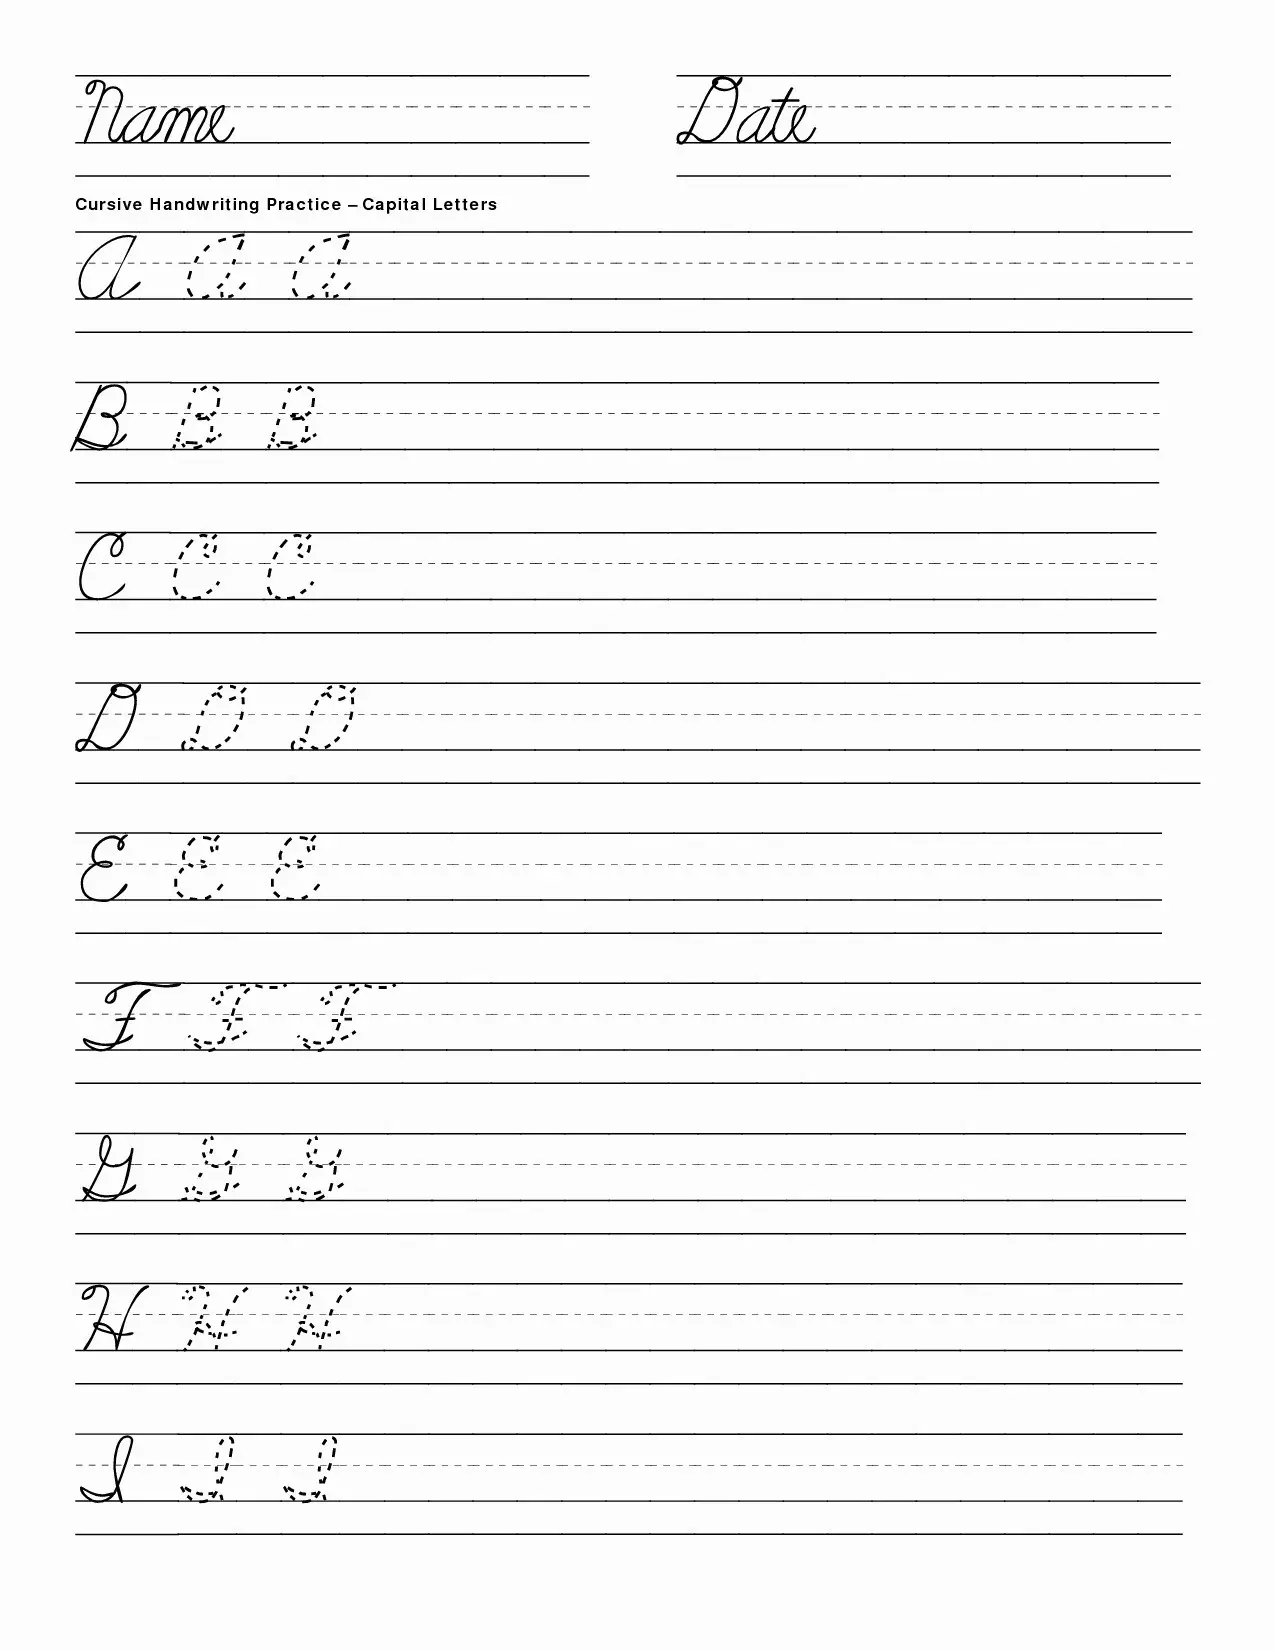 worksheets-for-cursive-writing